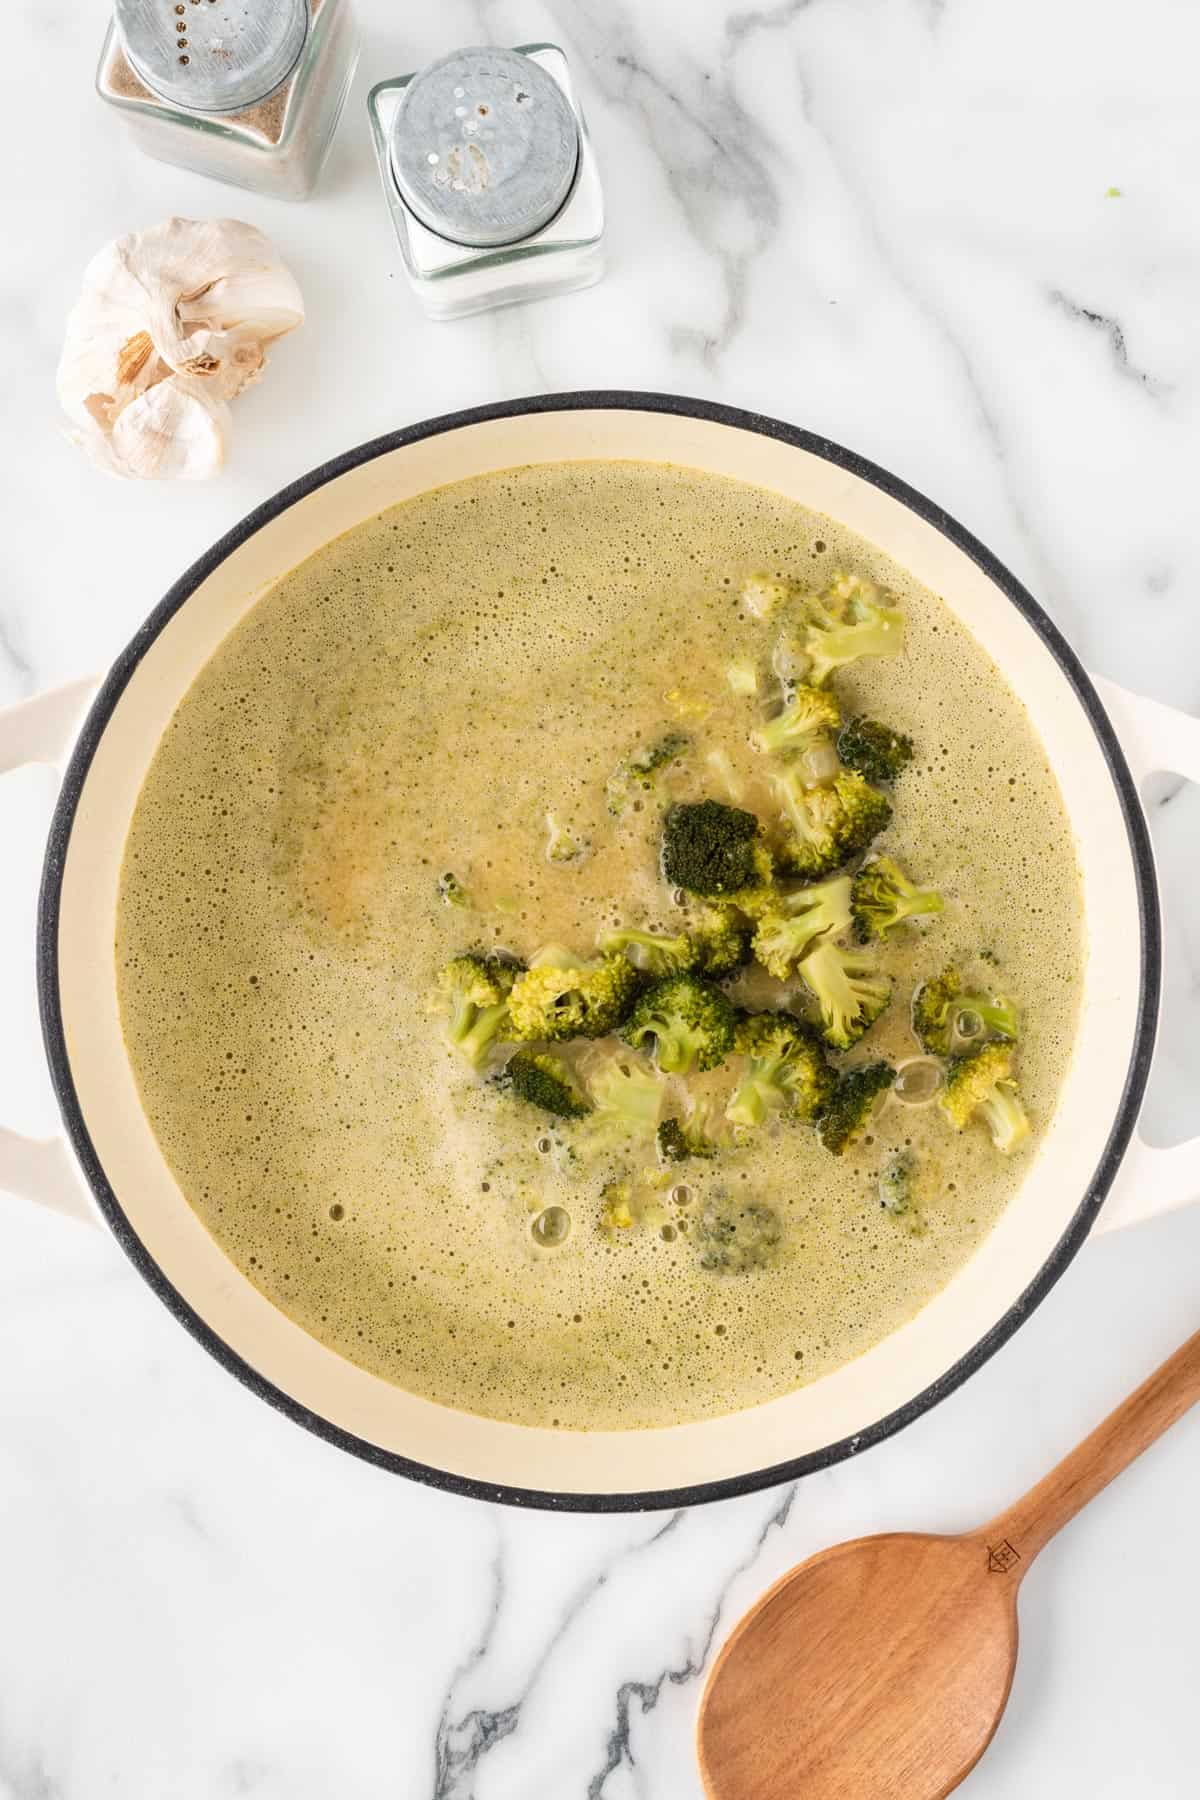 A photo of cooked broccoli in a pot of soup.